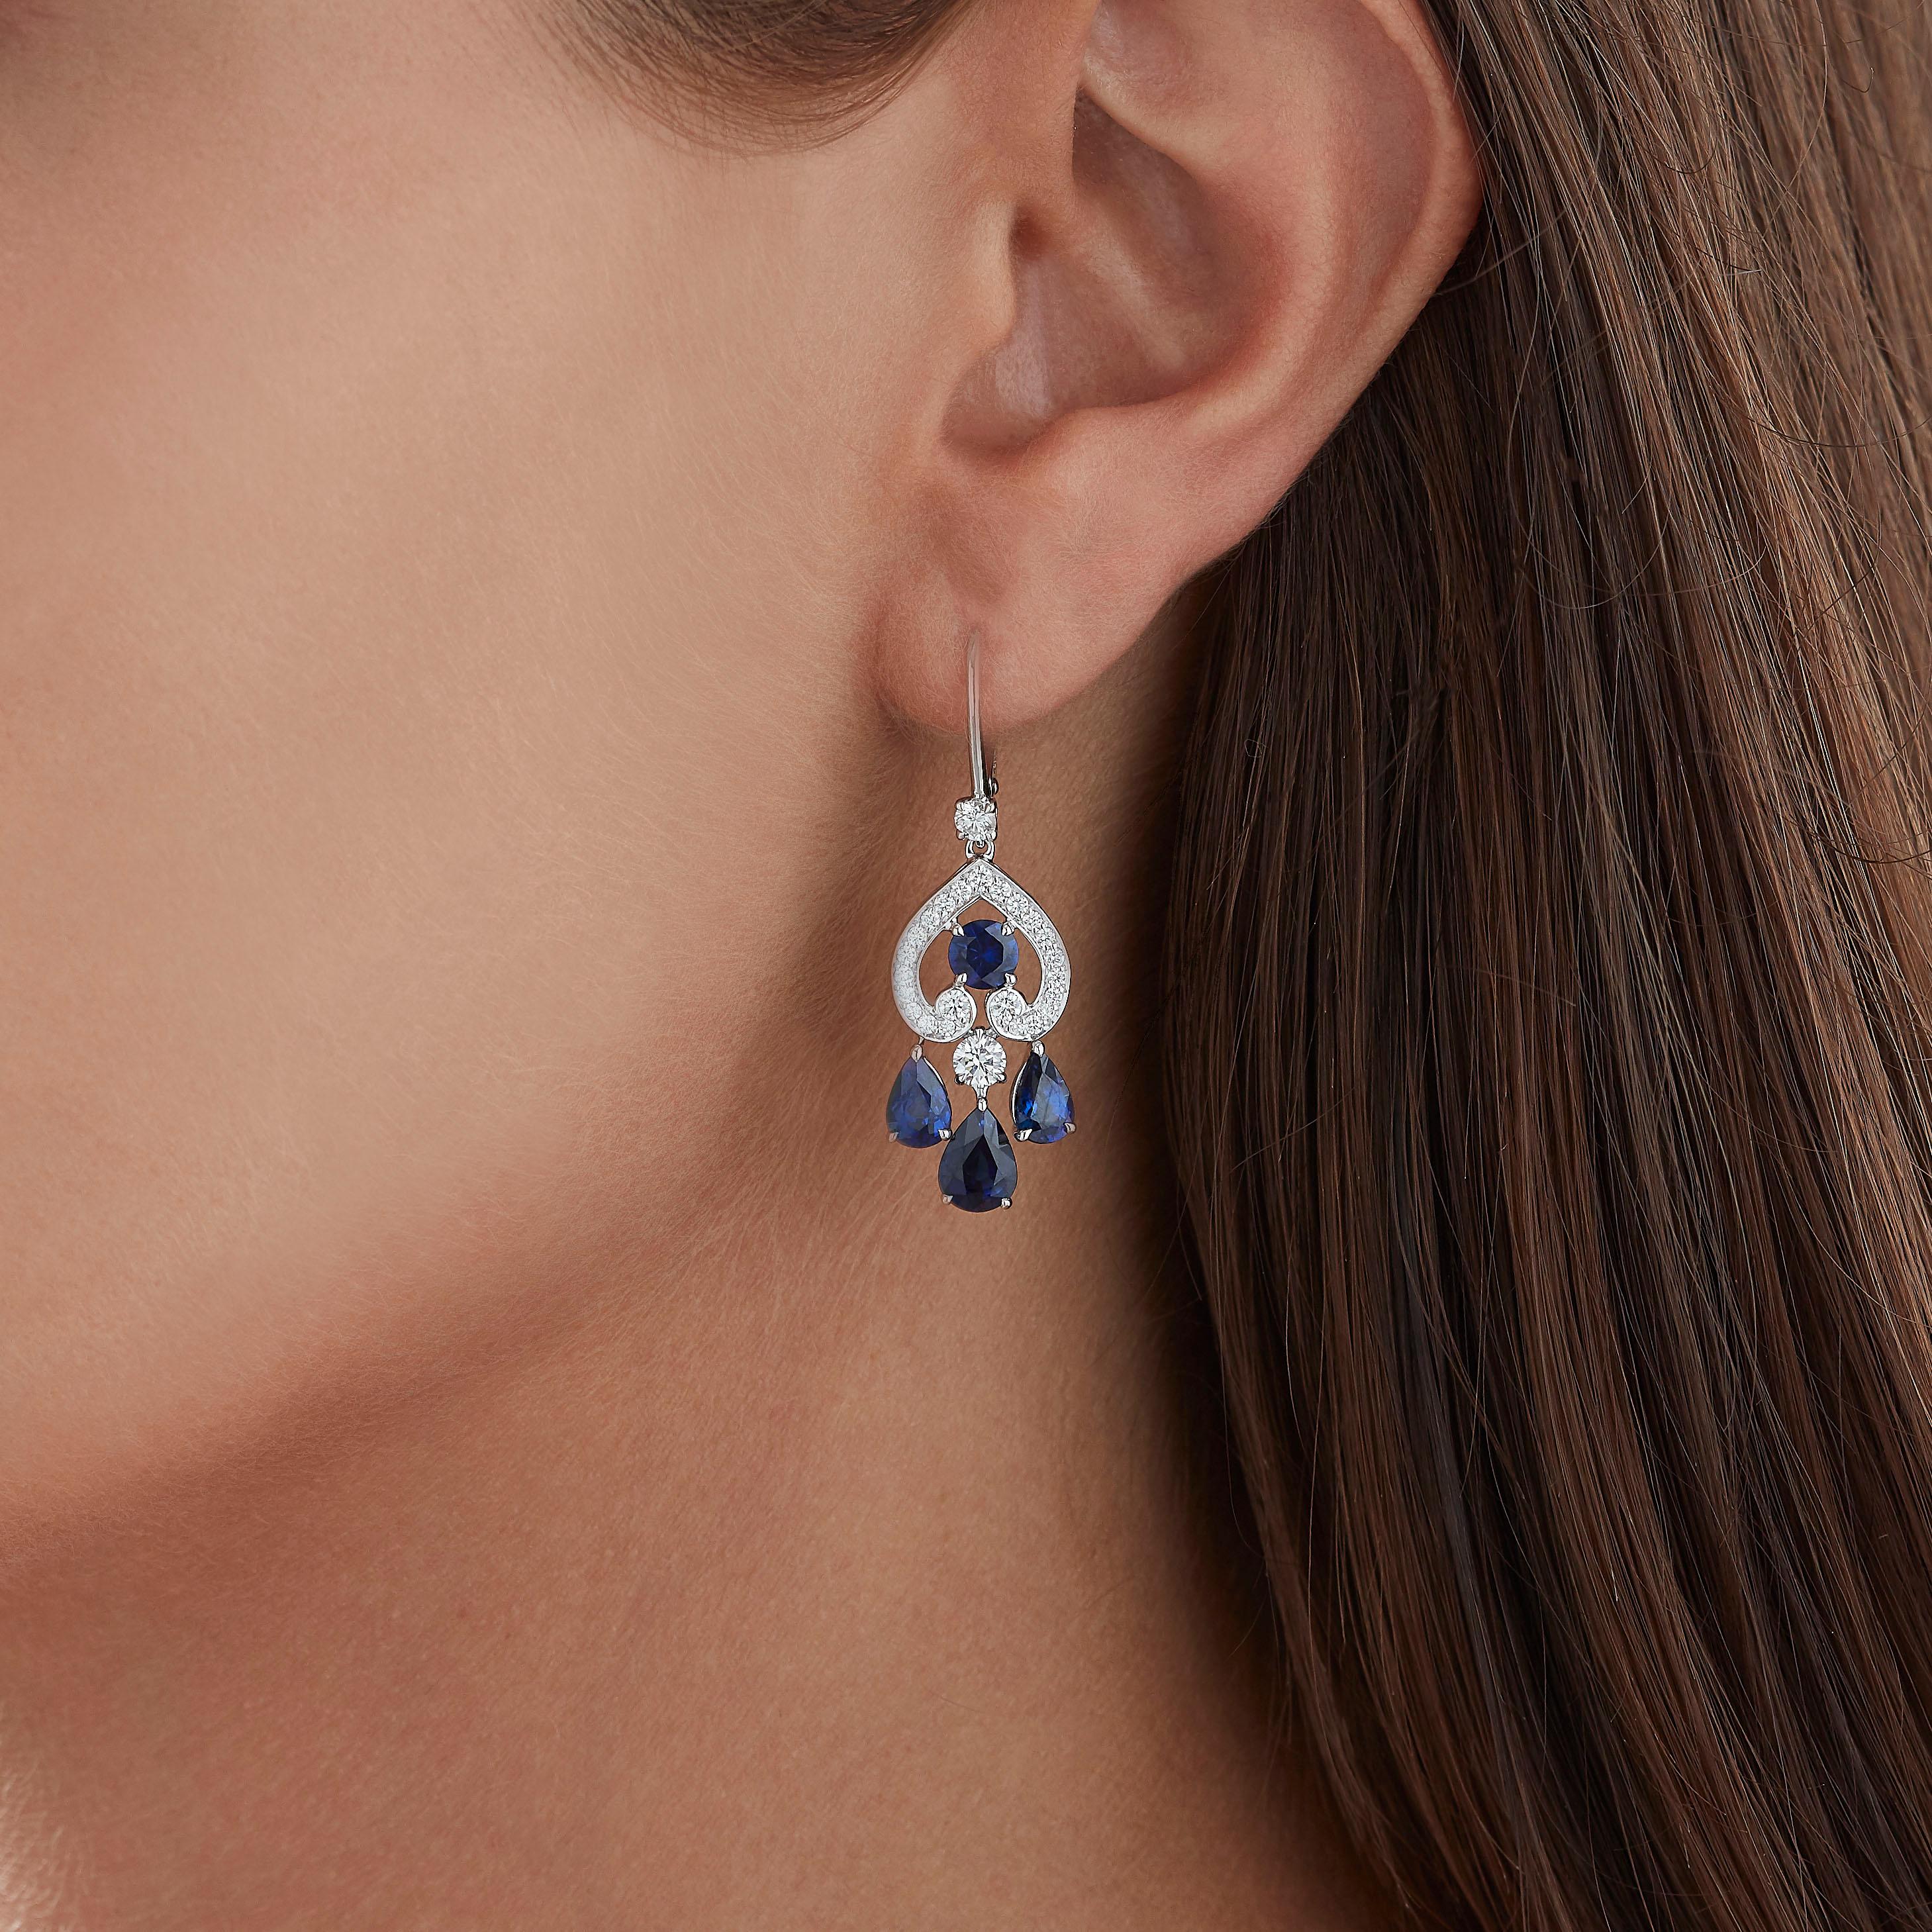 A pair of House of Garrard 18 karat white gold mini drop earrings from the 'Regal Cascade' collection, set with round and pear shape sapphires and round white diamonds.    
                                                                            